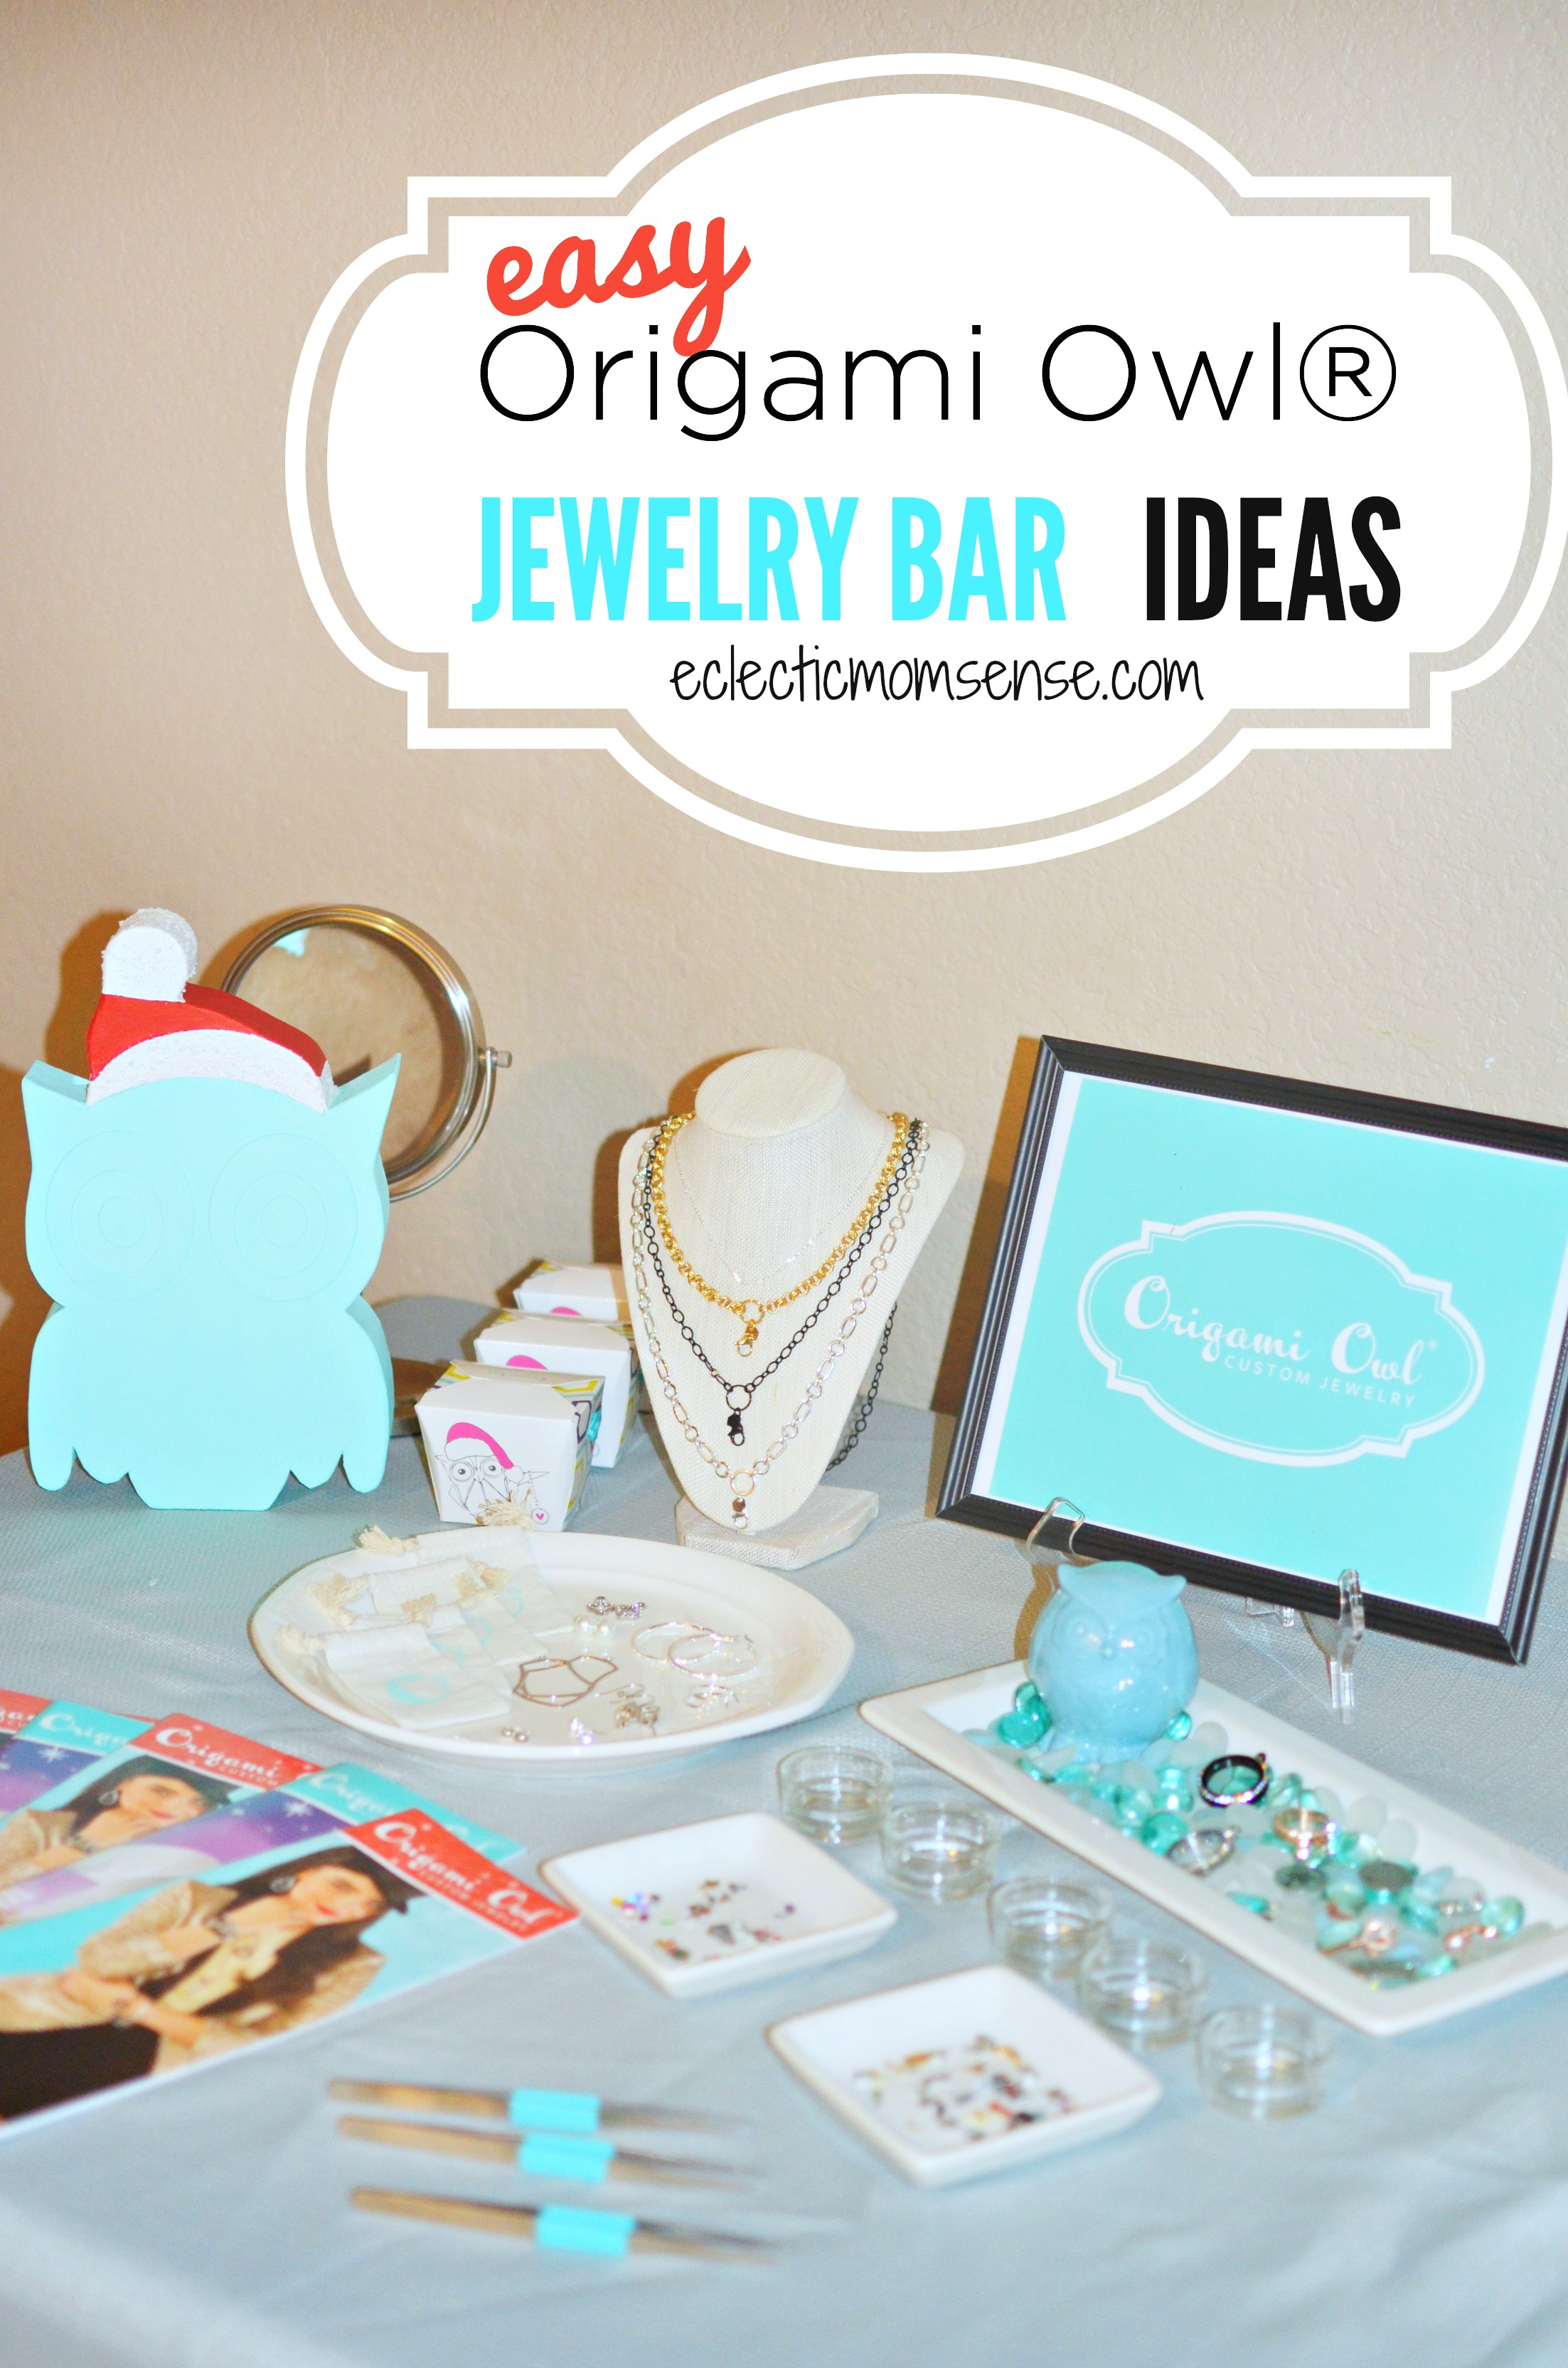 How To Make Origami Owl Origami Owl Jewelry Bar Ideas Eclectic Momsense